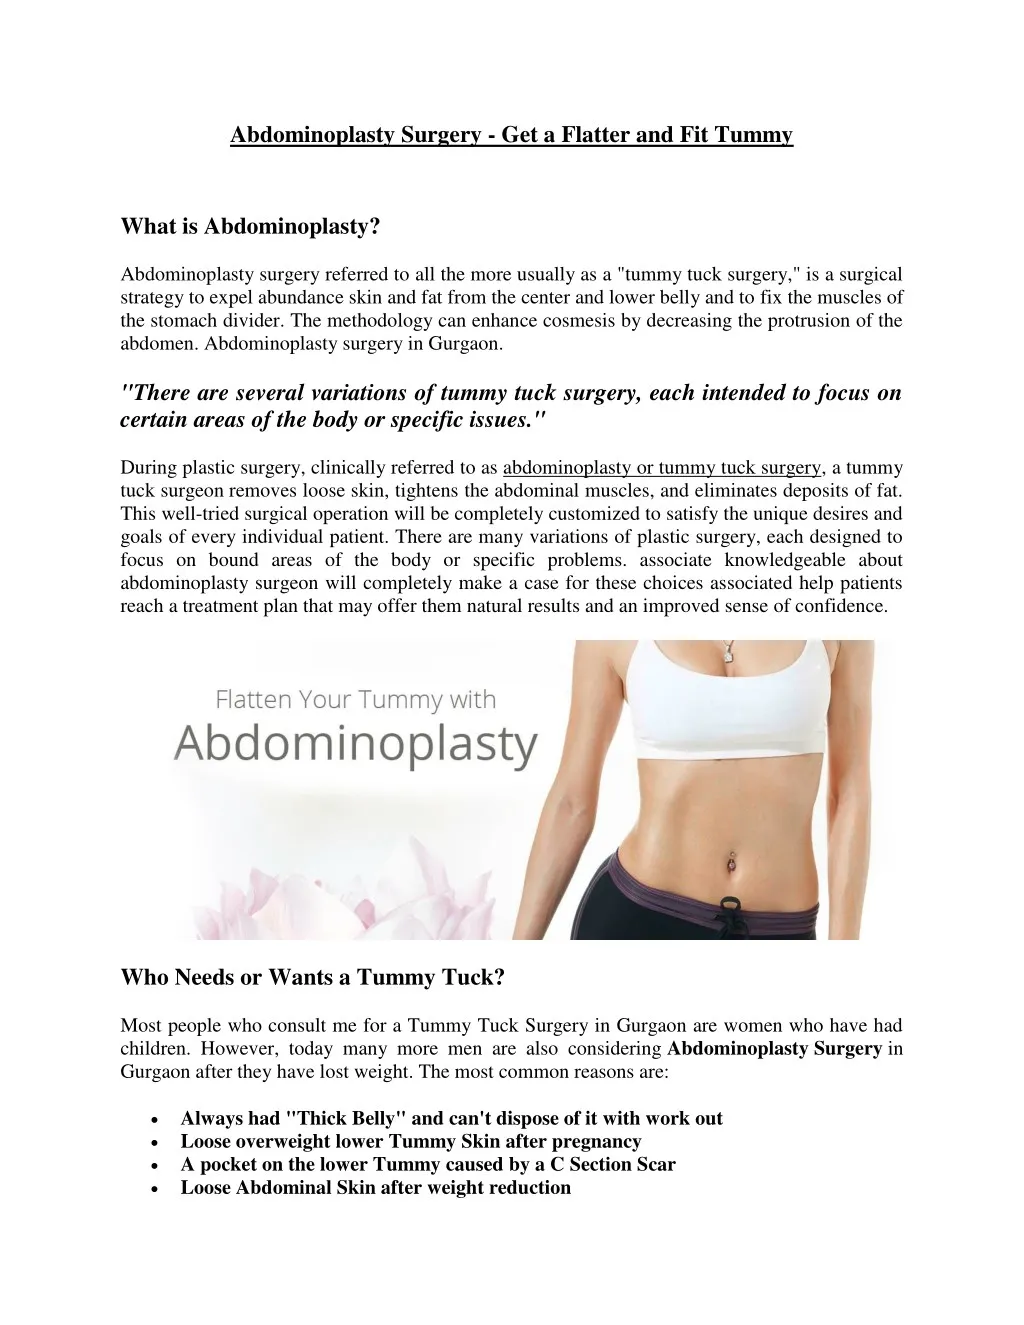 abdominoplasty surgery get a flatter and fit tummy